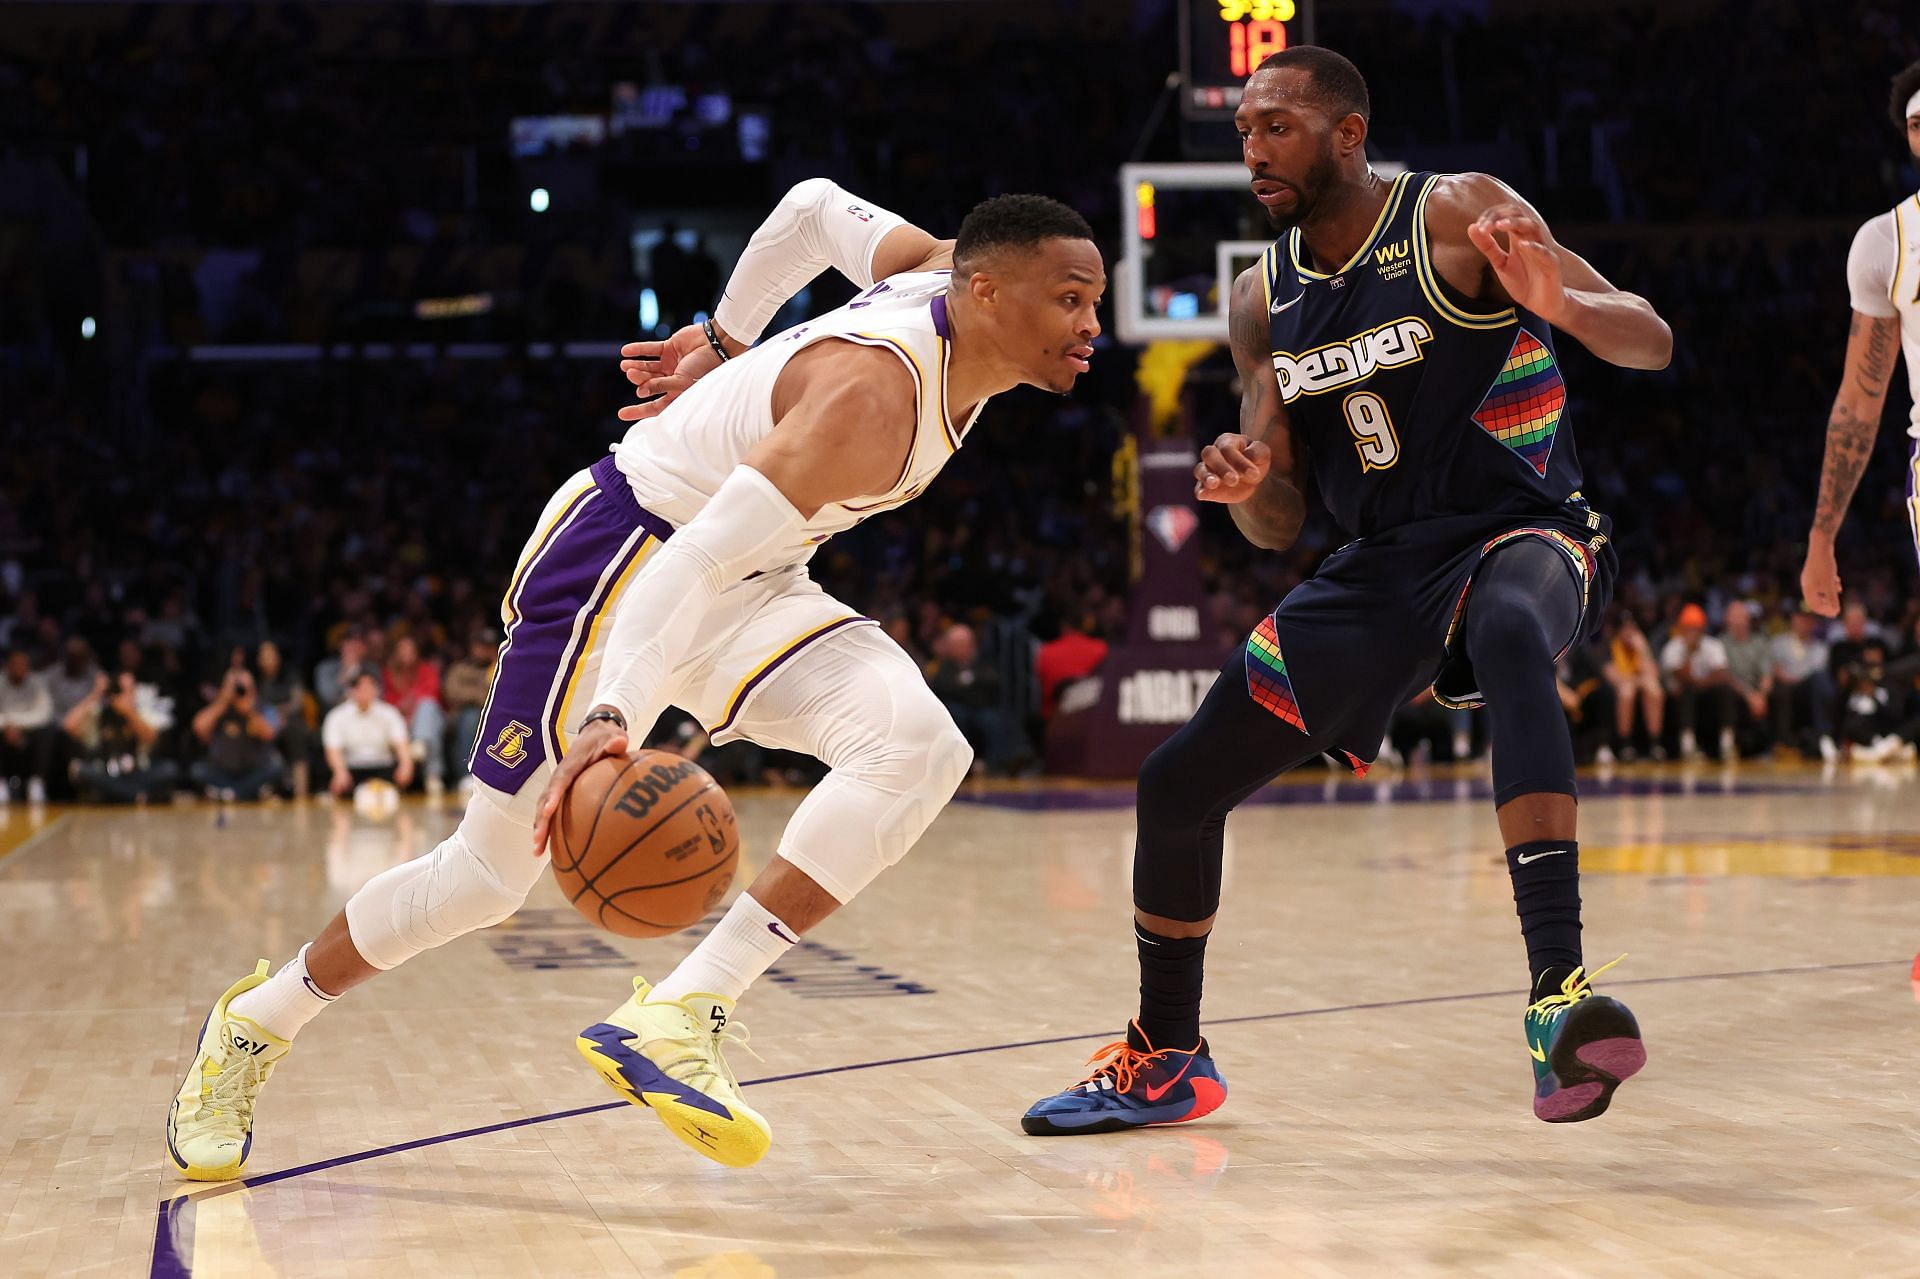 LA Lakers guard Russell Westbrook with the ball